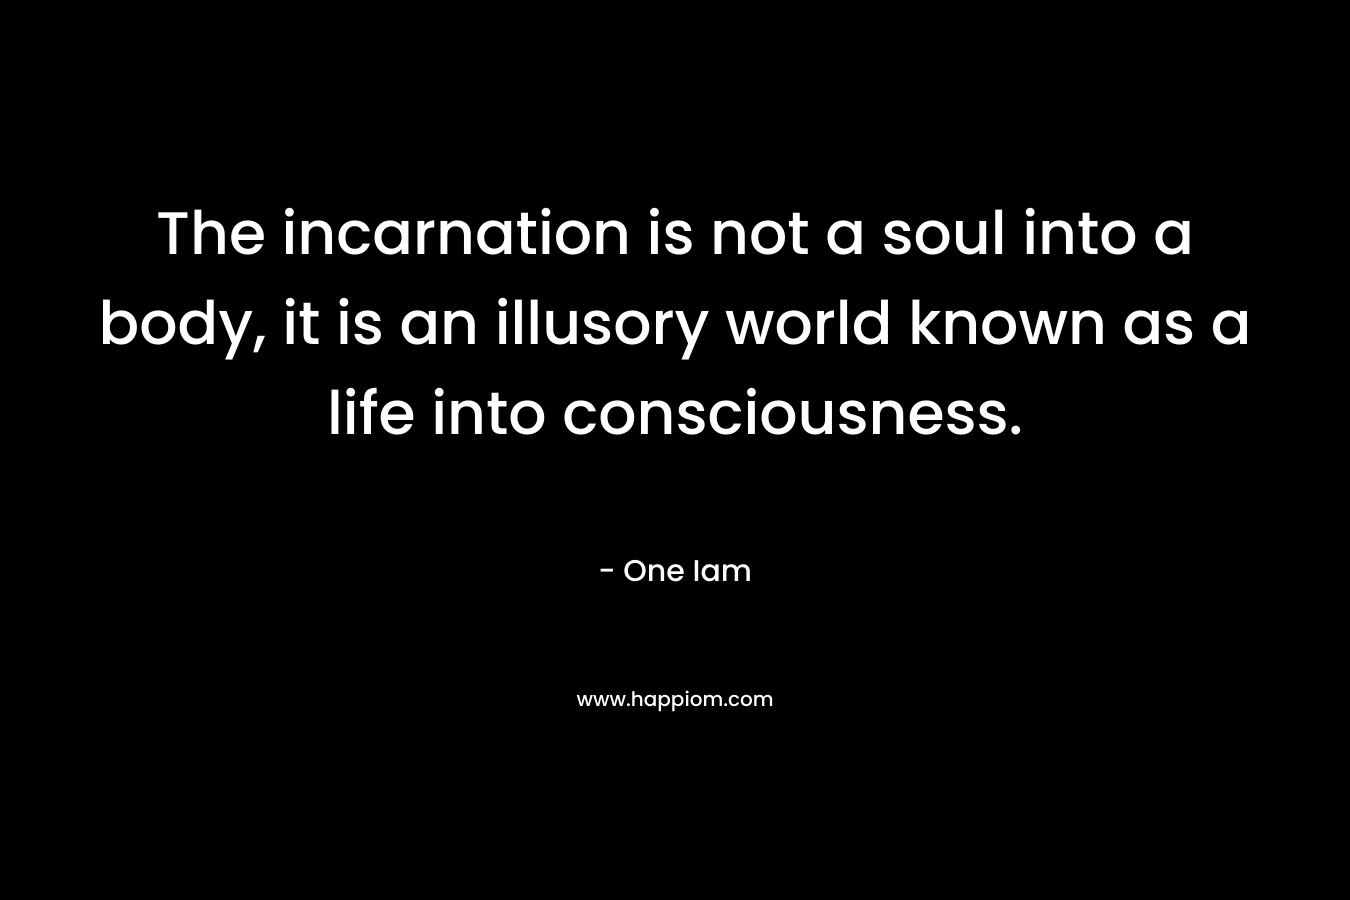 The incarnation is not a soul into a body, it is an illusory world known as a life into consciousness. – One Iam